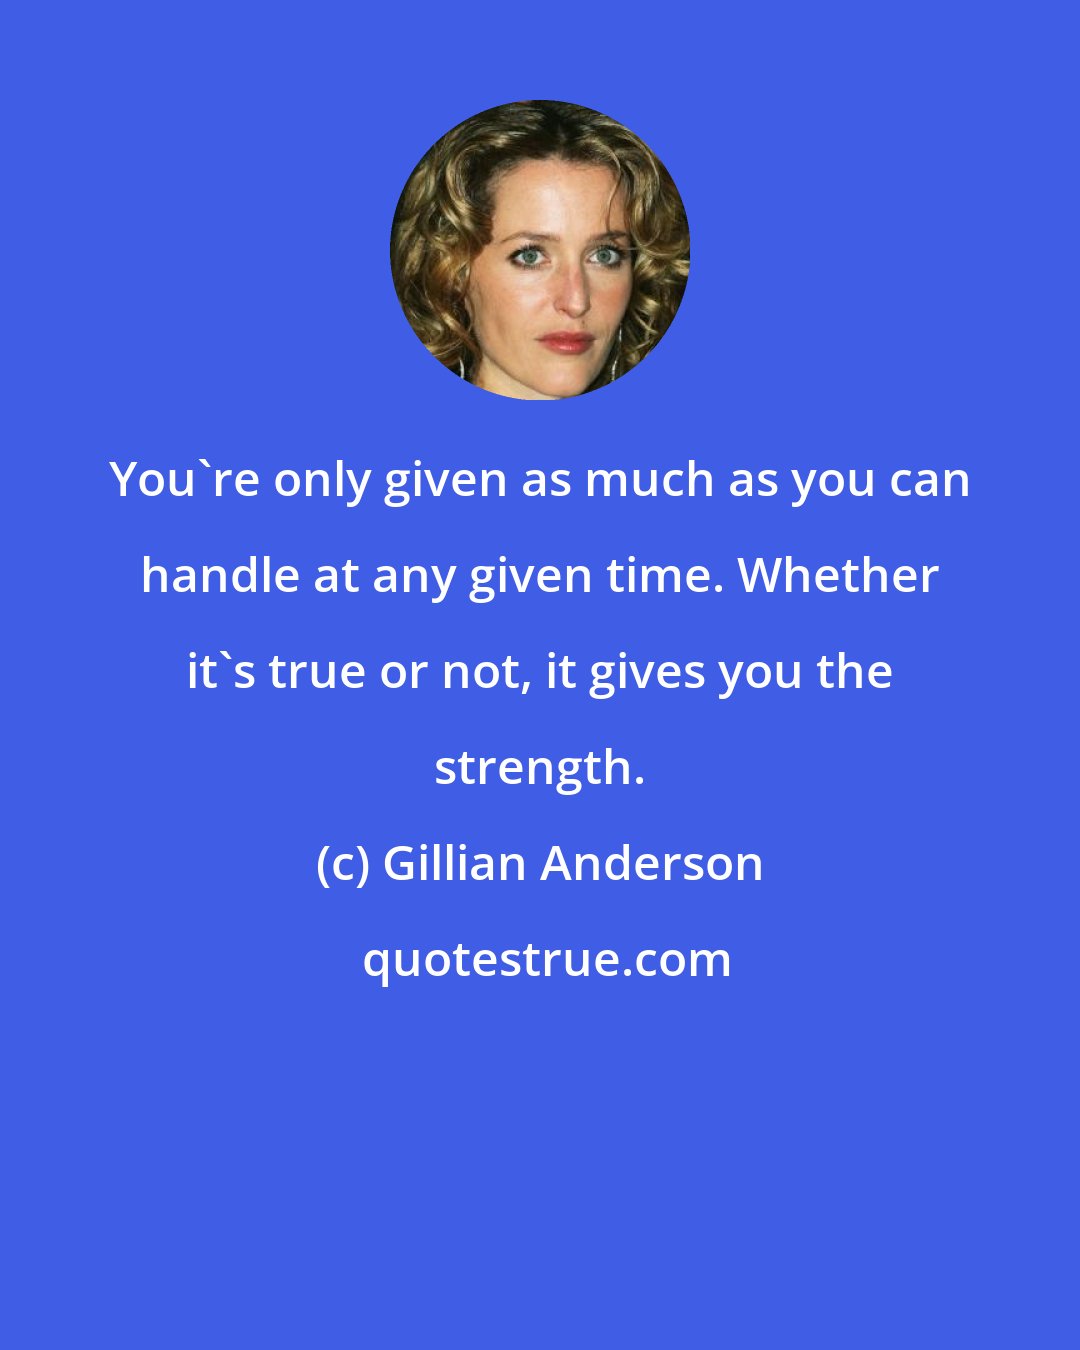 Gillian Anderson: You're only given as much as you can handle at any given time. Whether it's true or not, it gives you the strength.